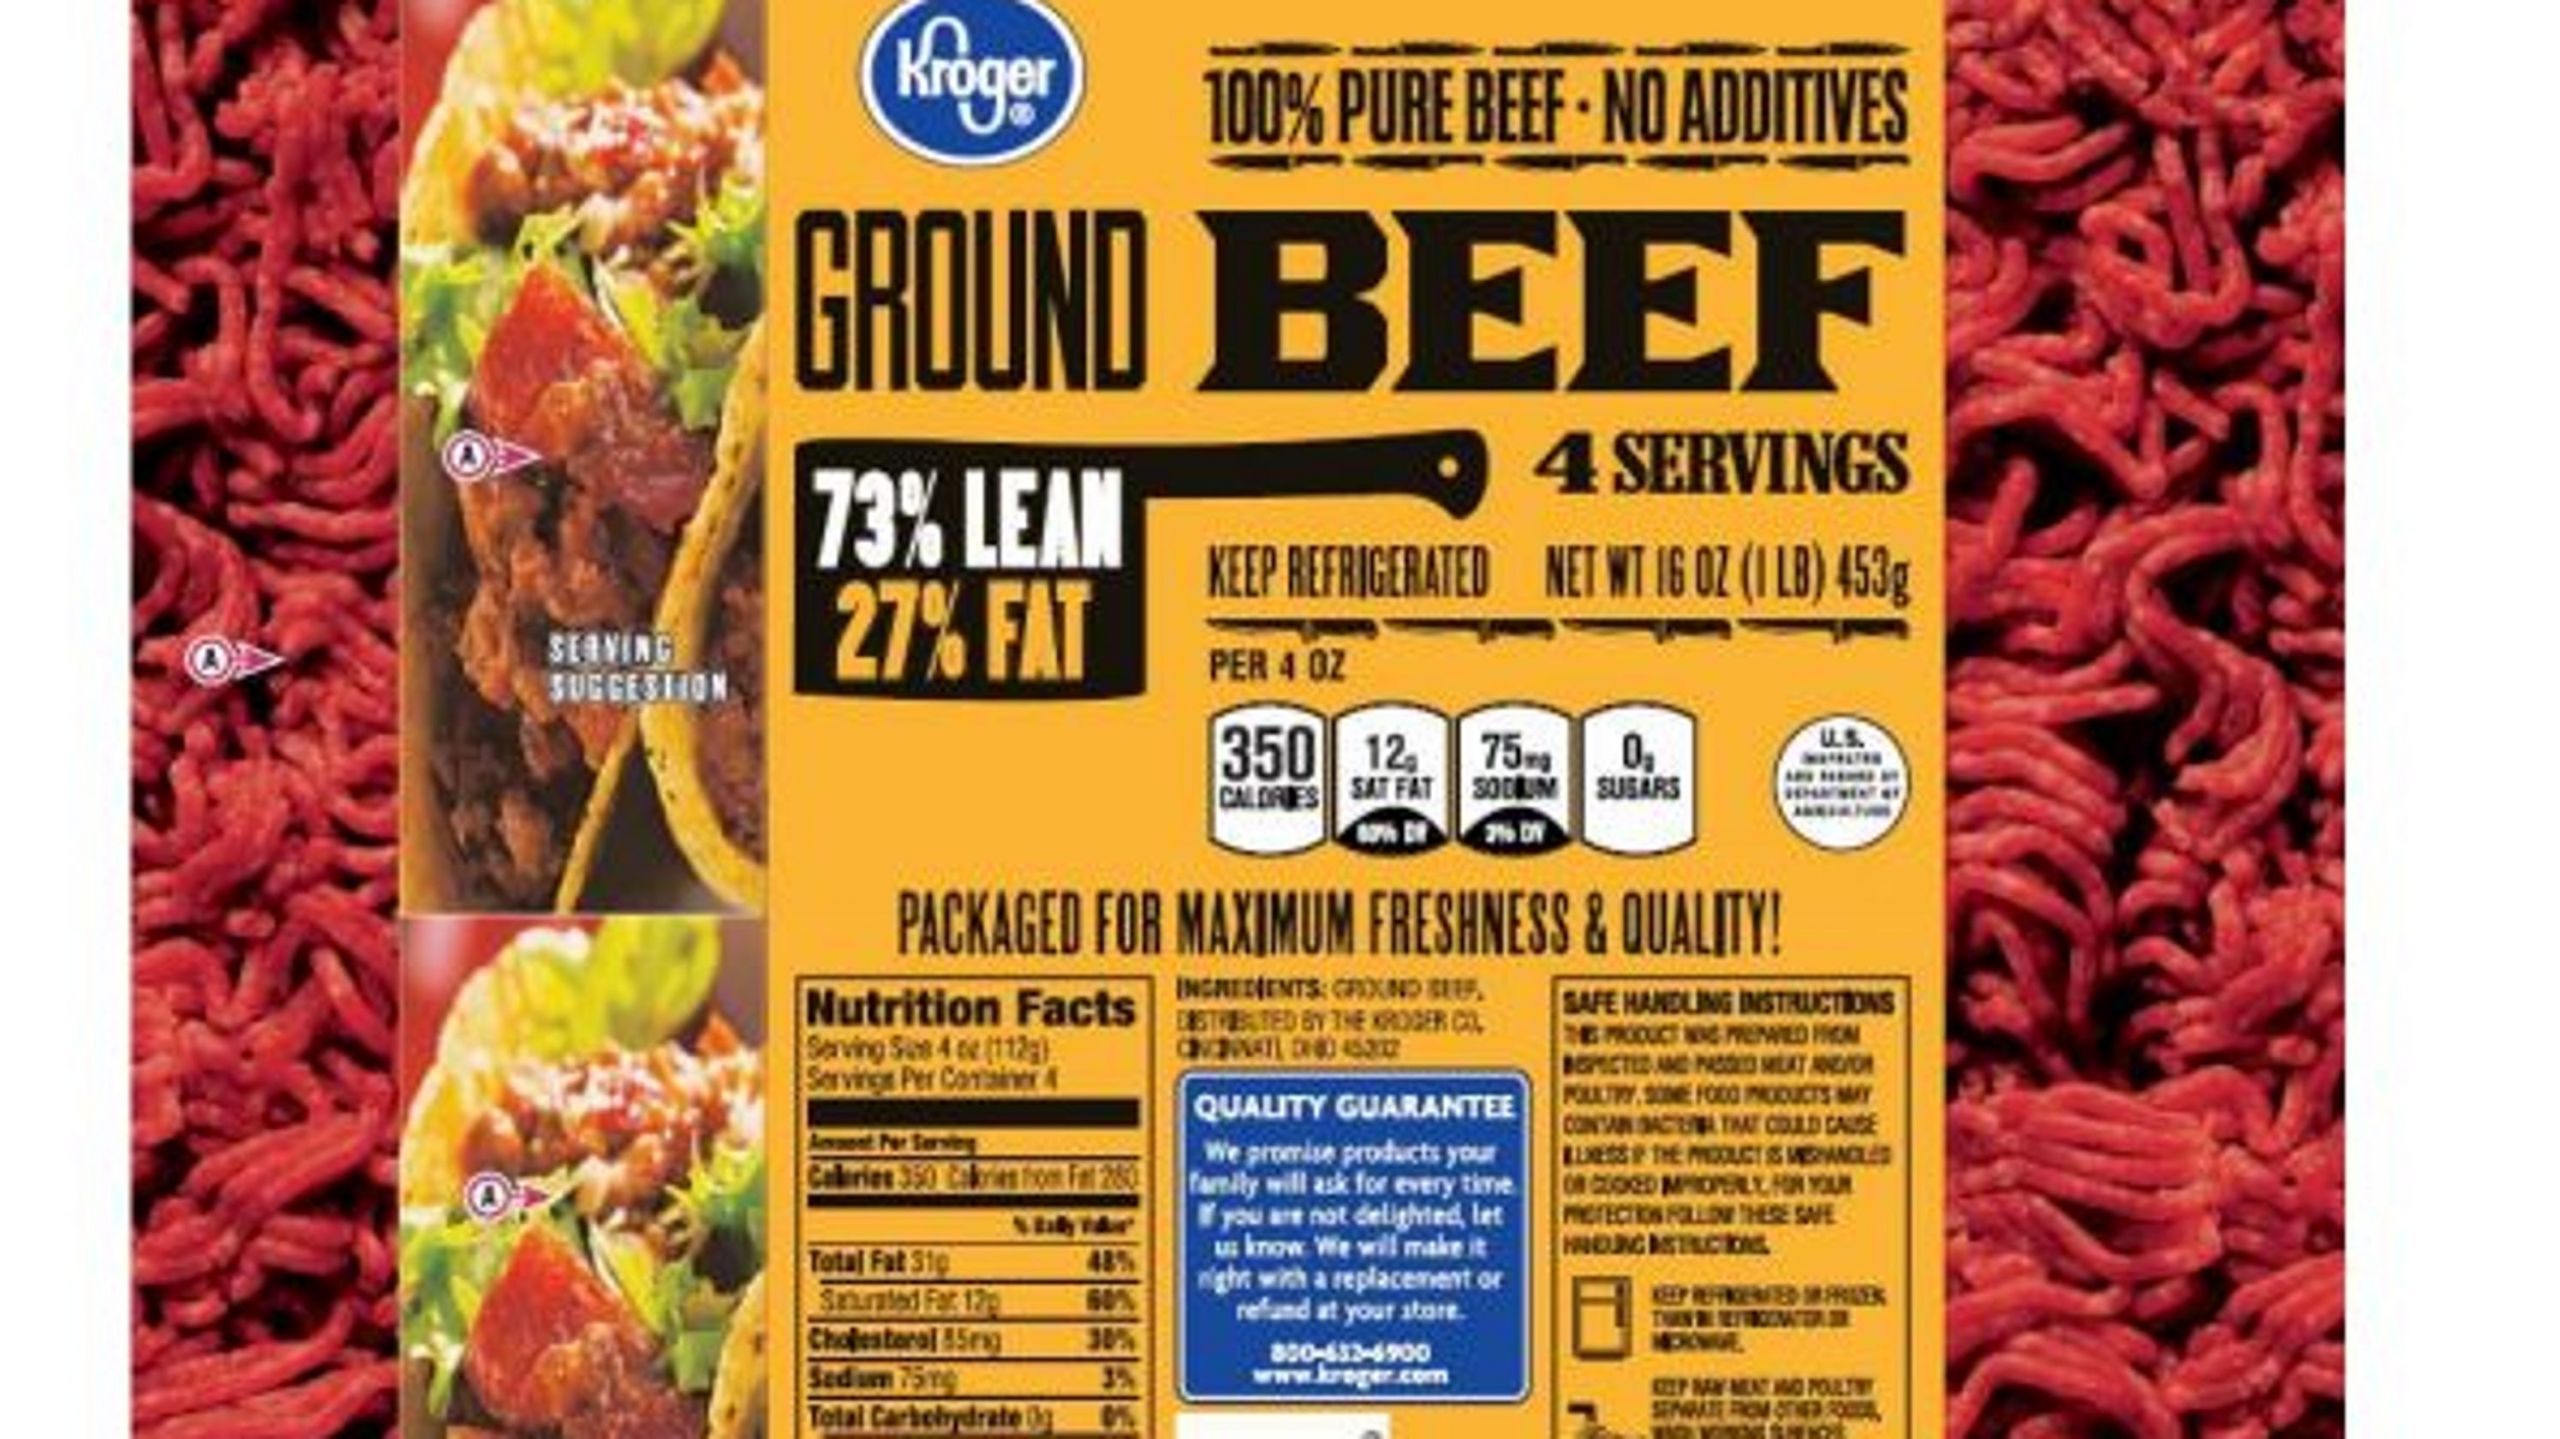 Recalled Ground Beef
 JBS Tolleson ground beef recall Kroger product contained